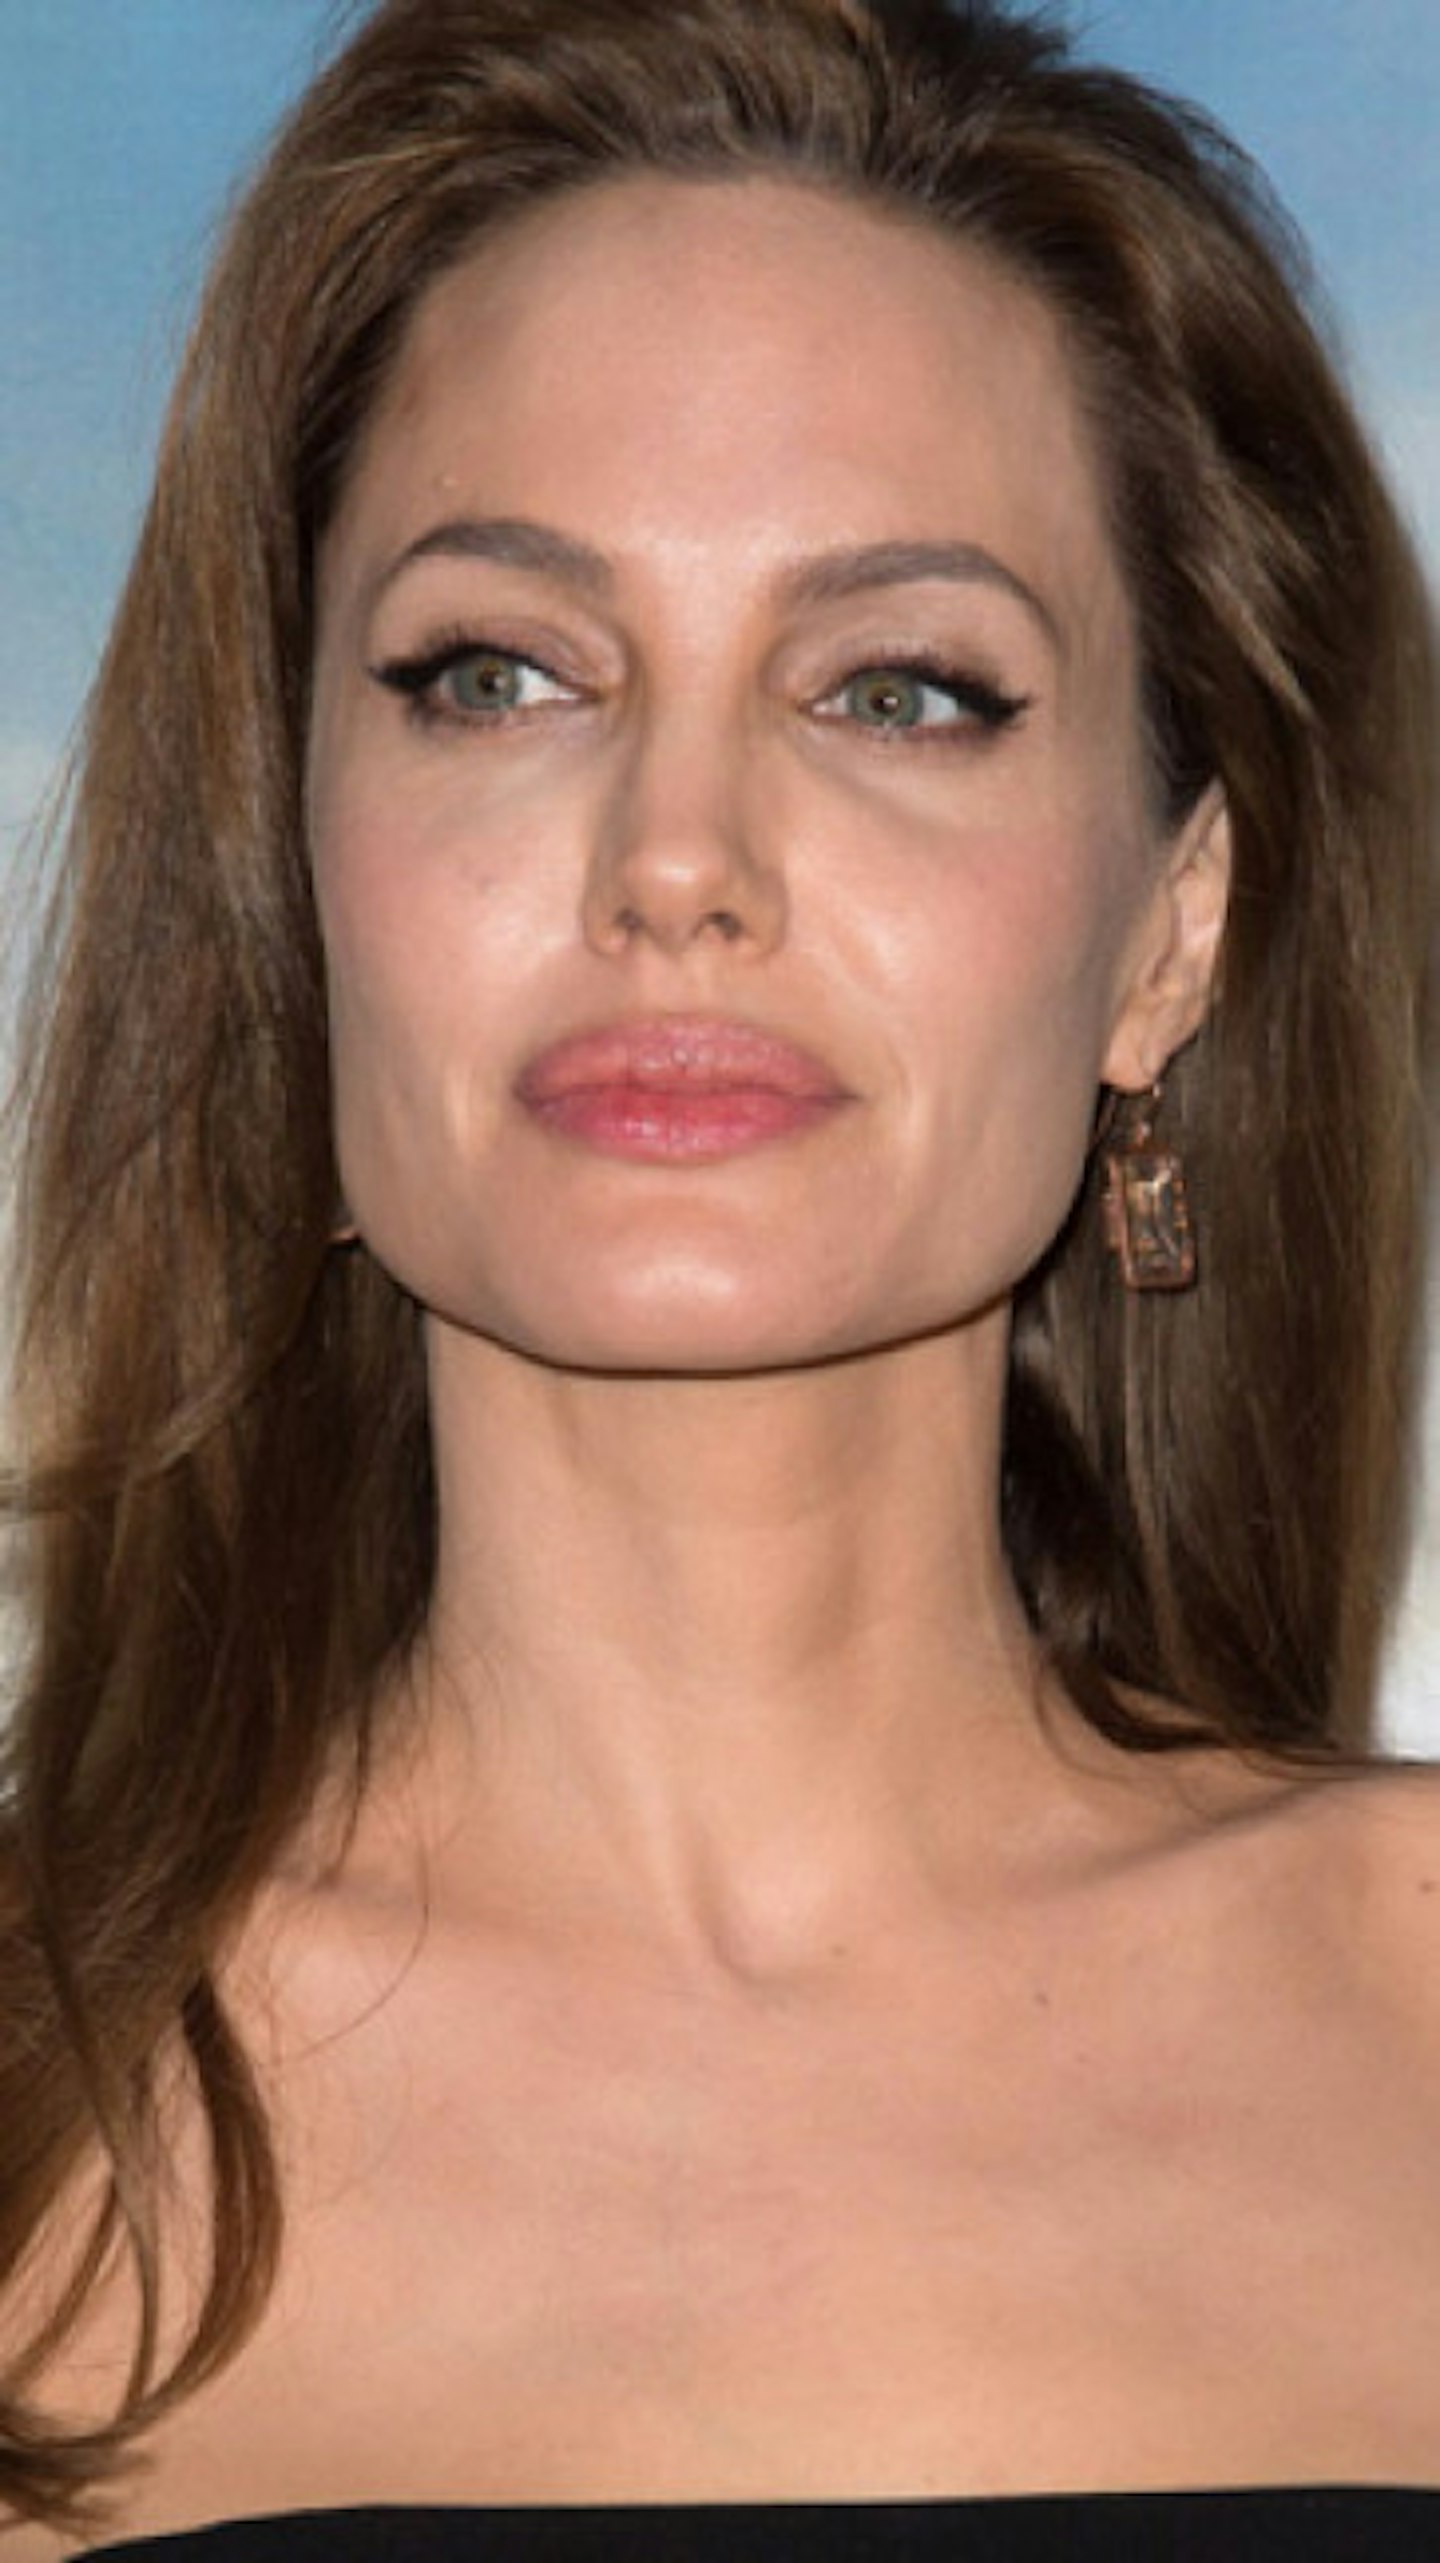 Angelina Jolie says that the kidnappings 'sicken' her